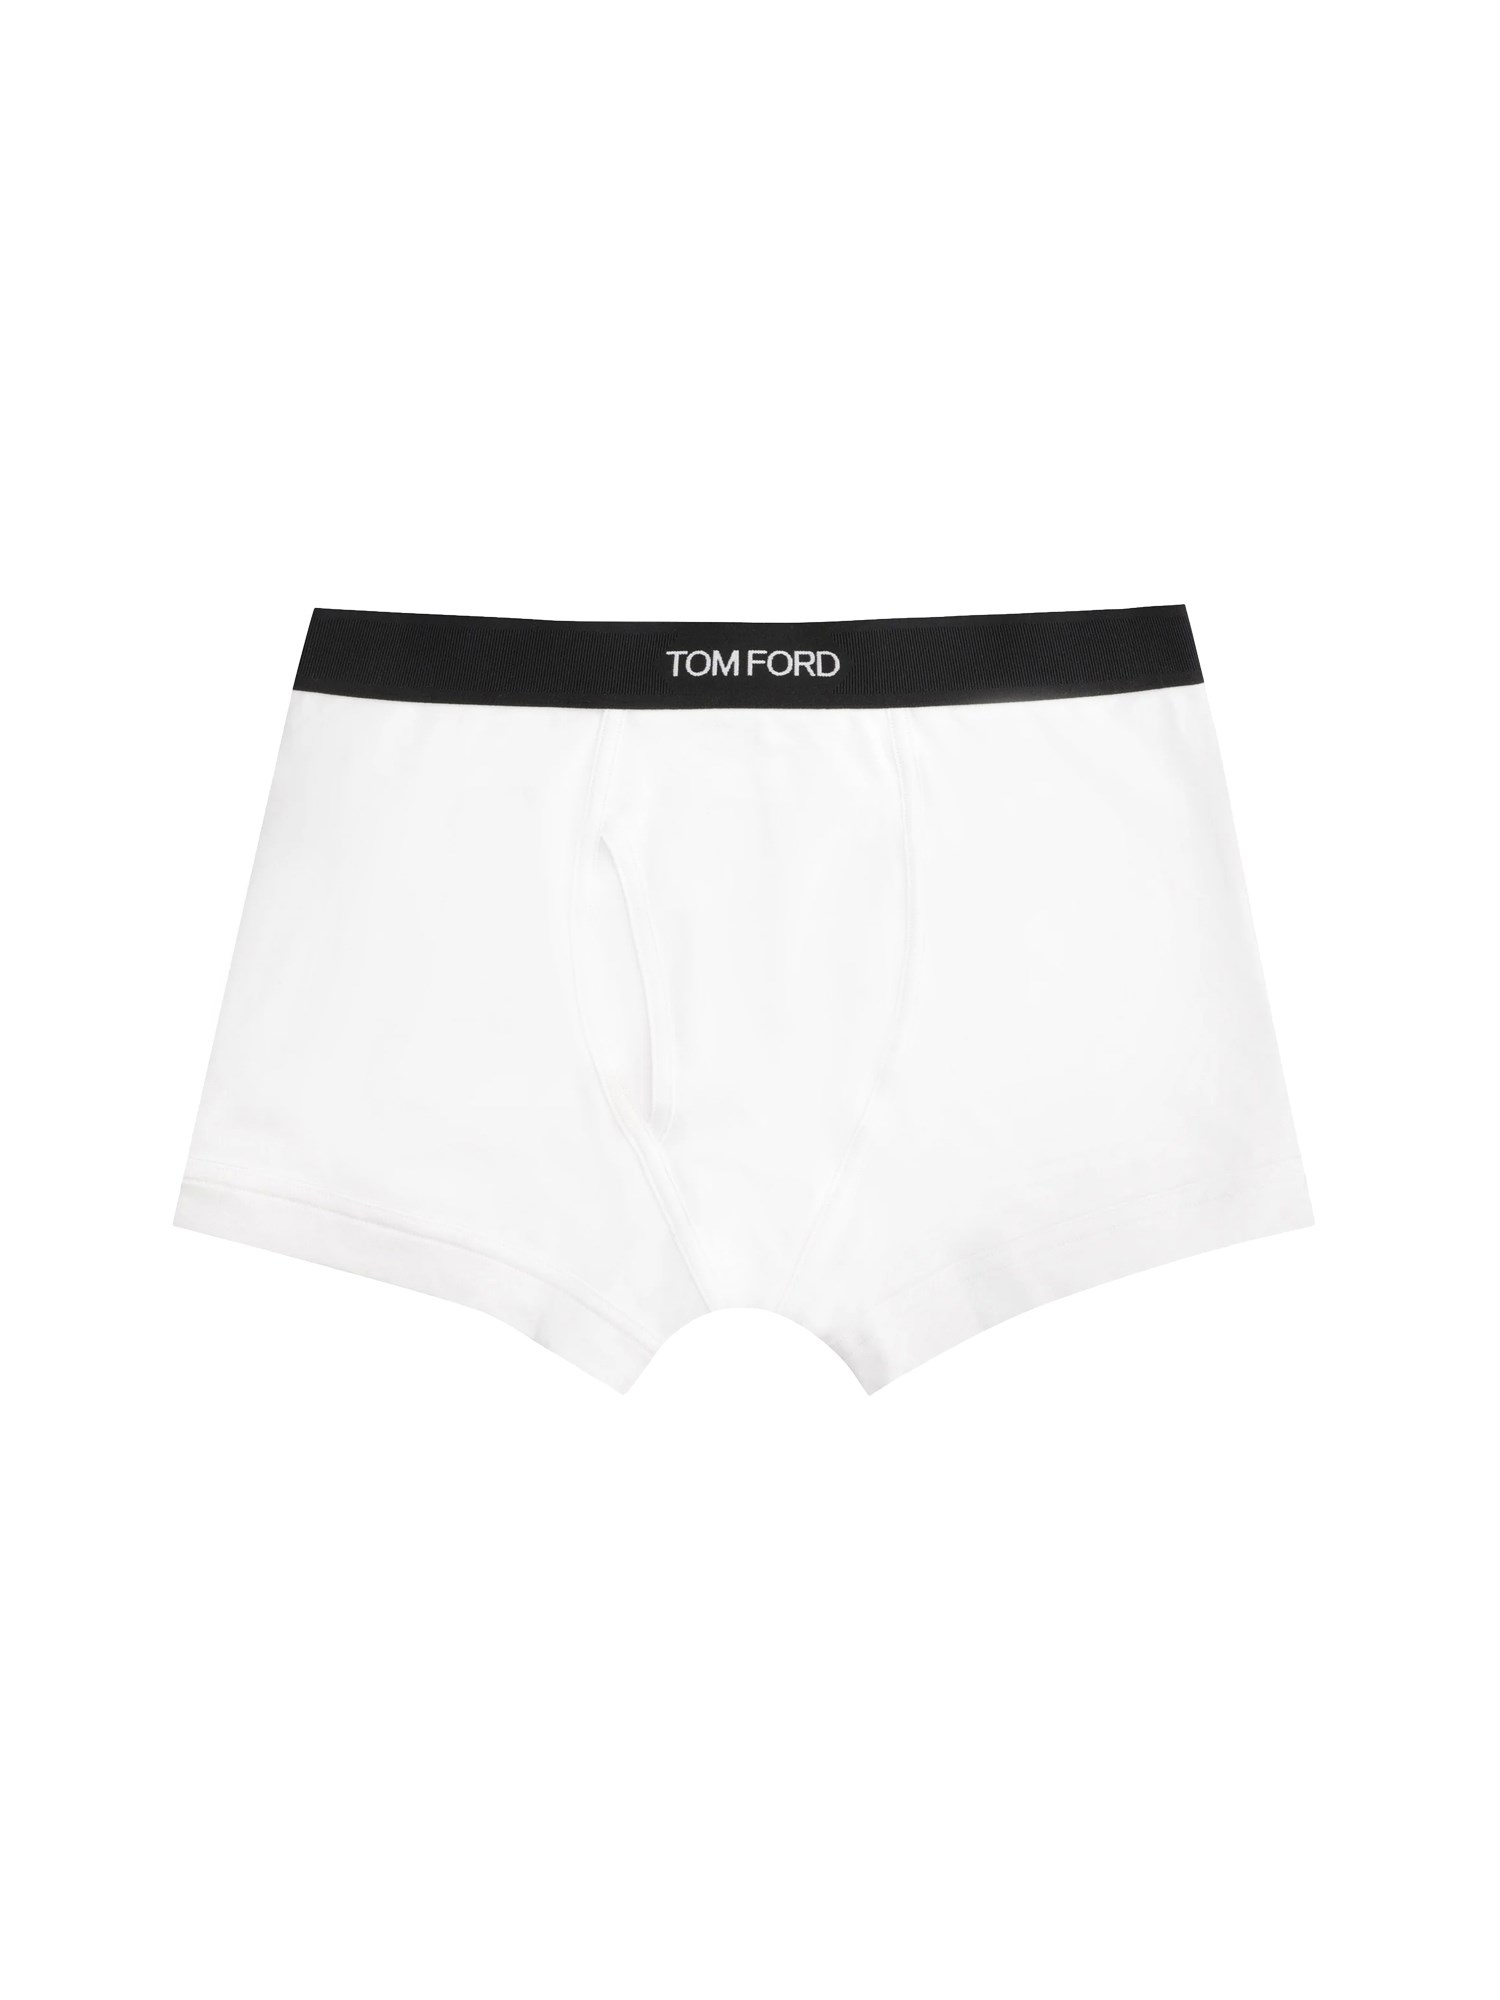 tom ford boxers with logo